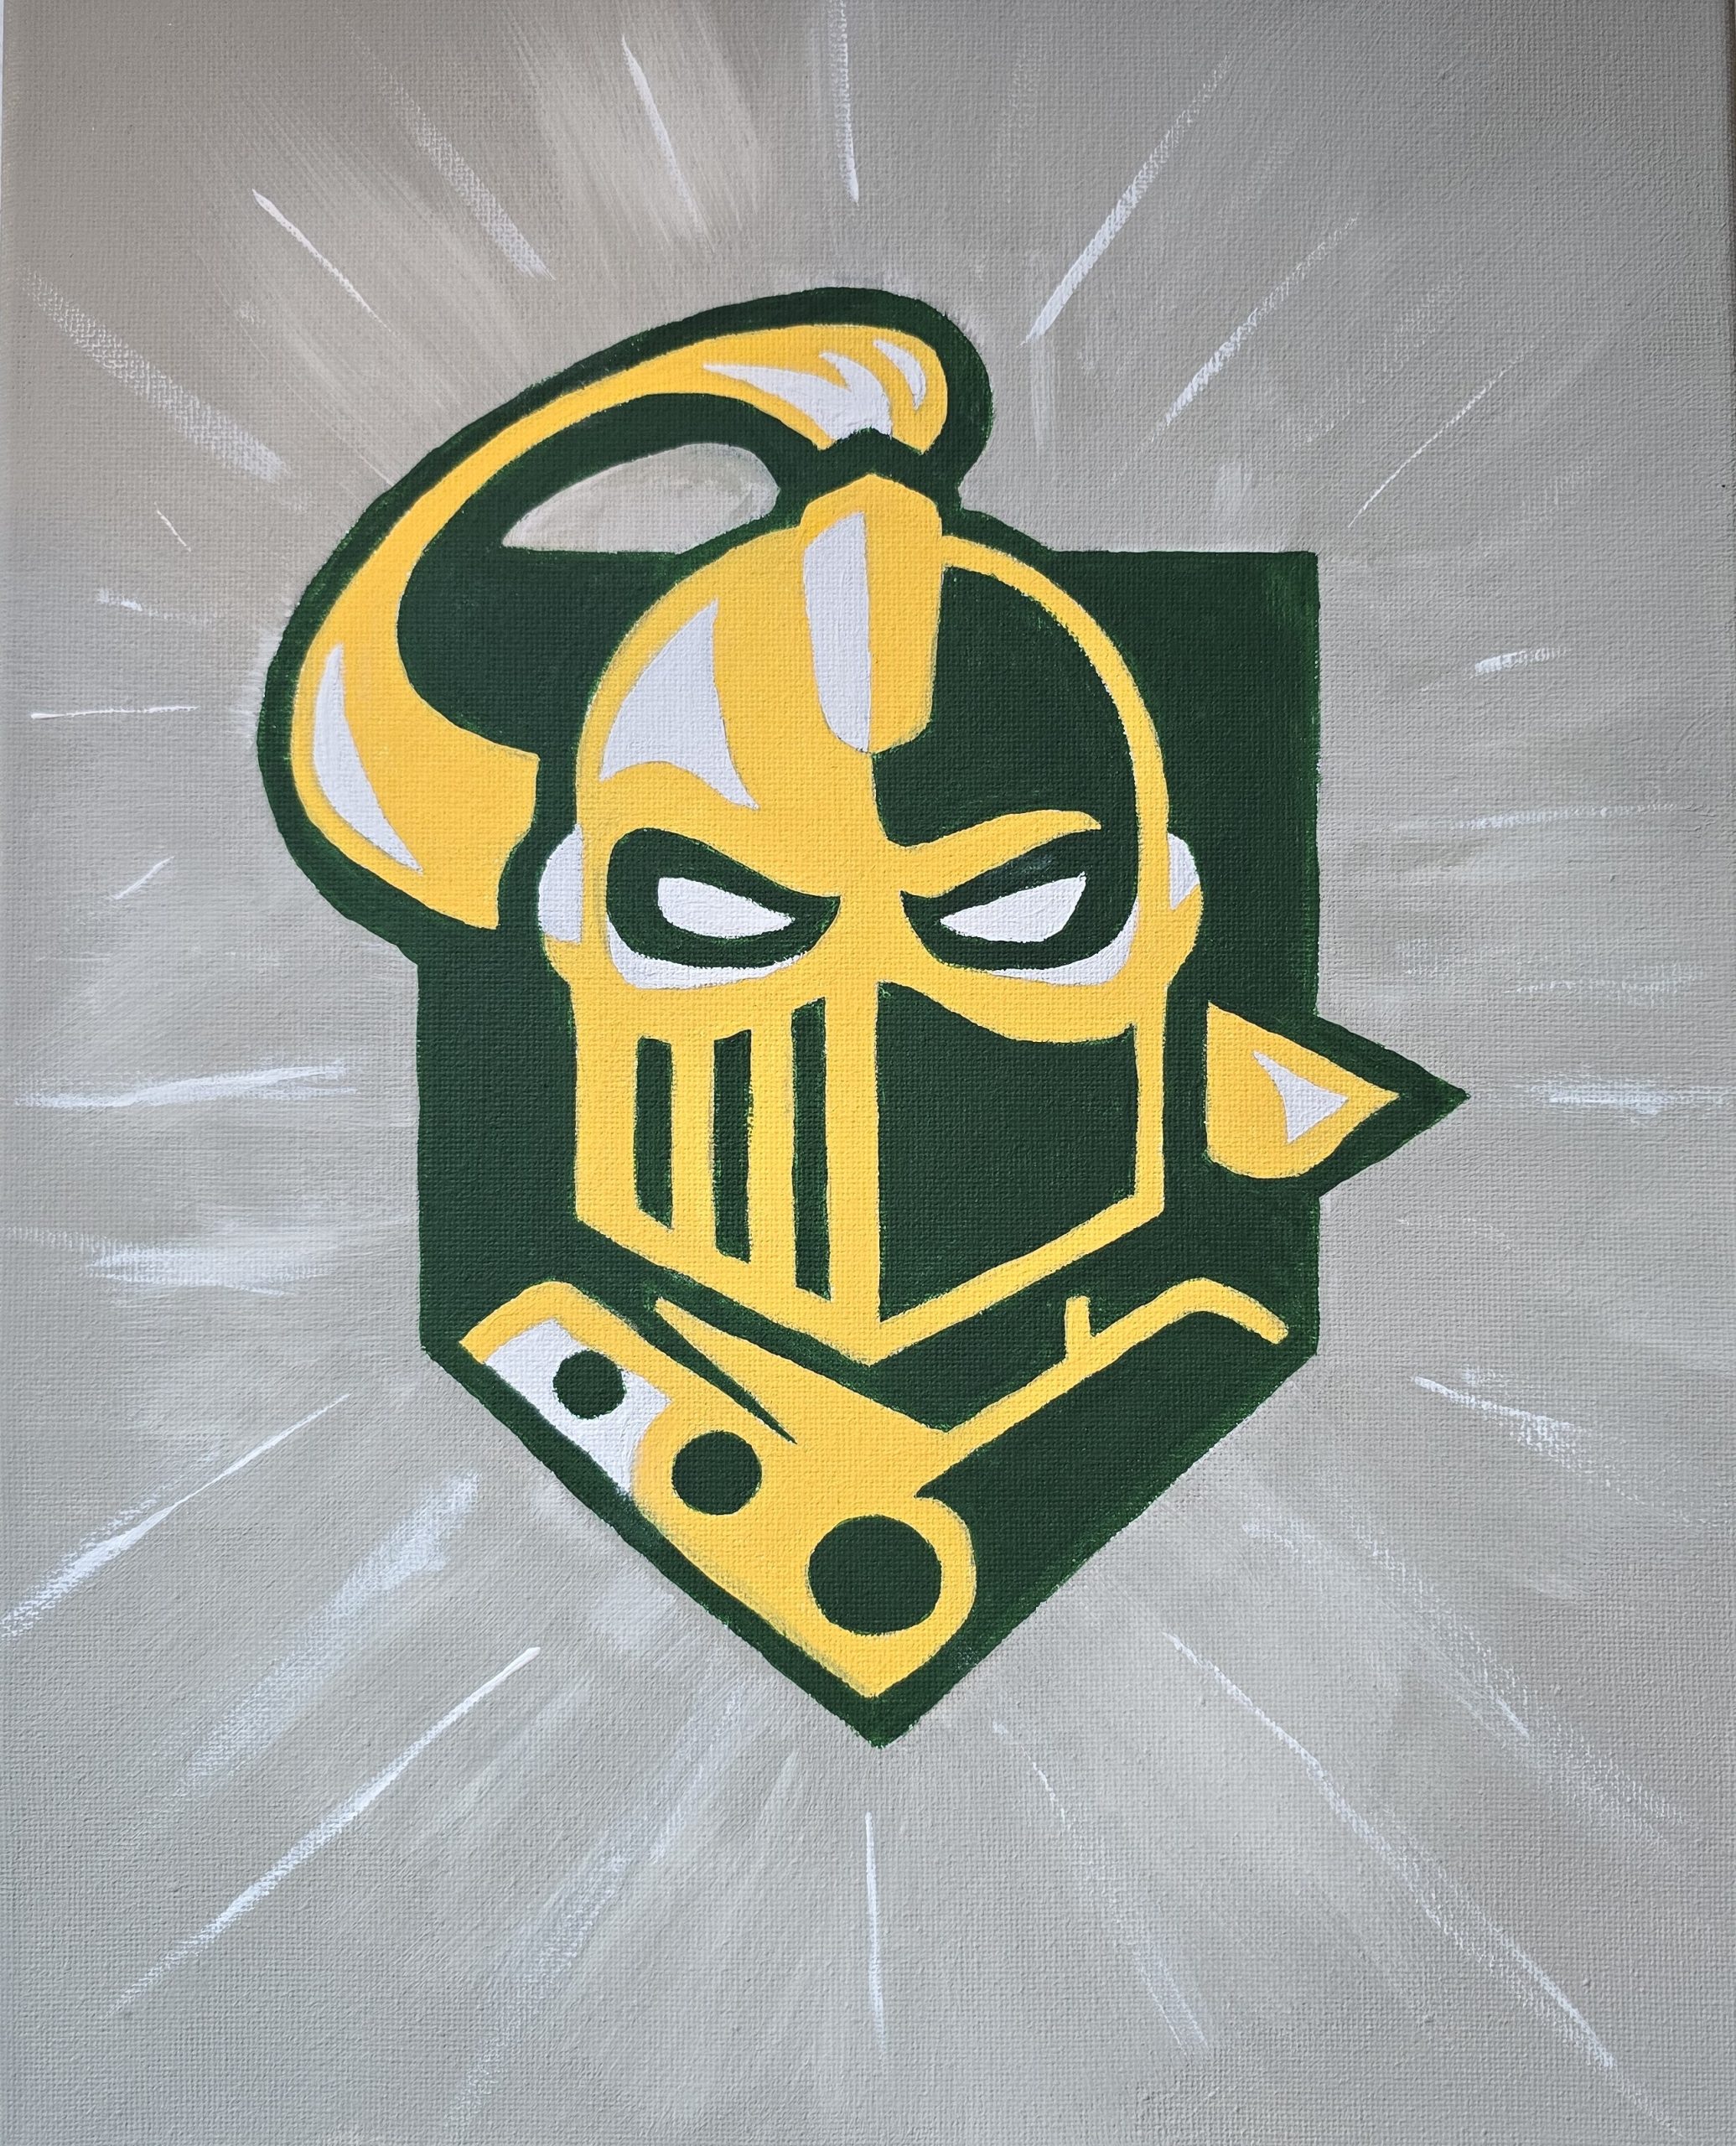 a hand painted Clarkson Athletics logo on a gray background.